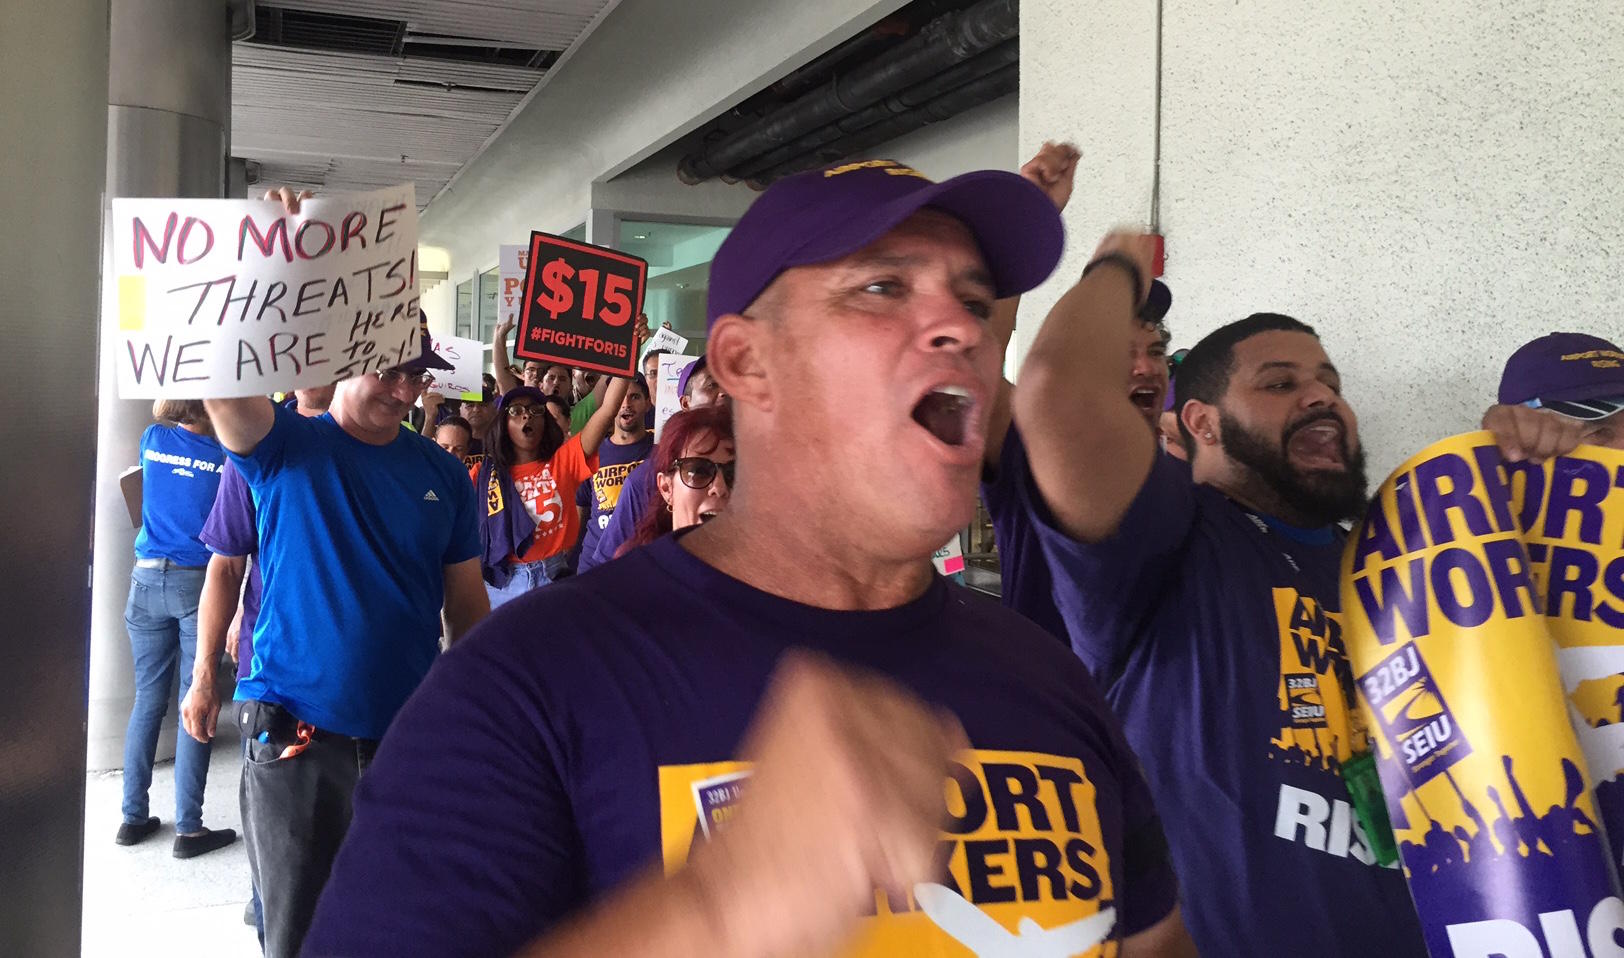 Workers at Miami International Airport protested for 24 Hours